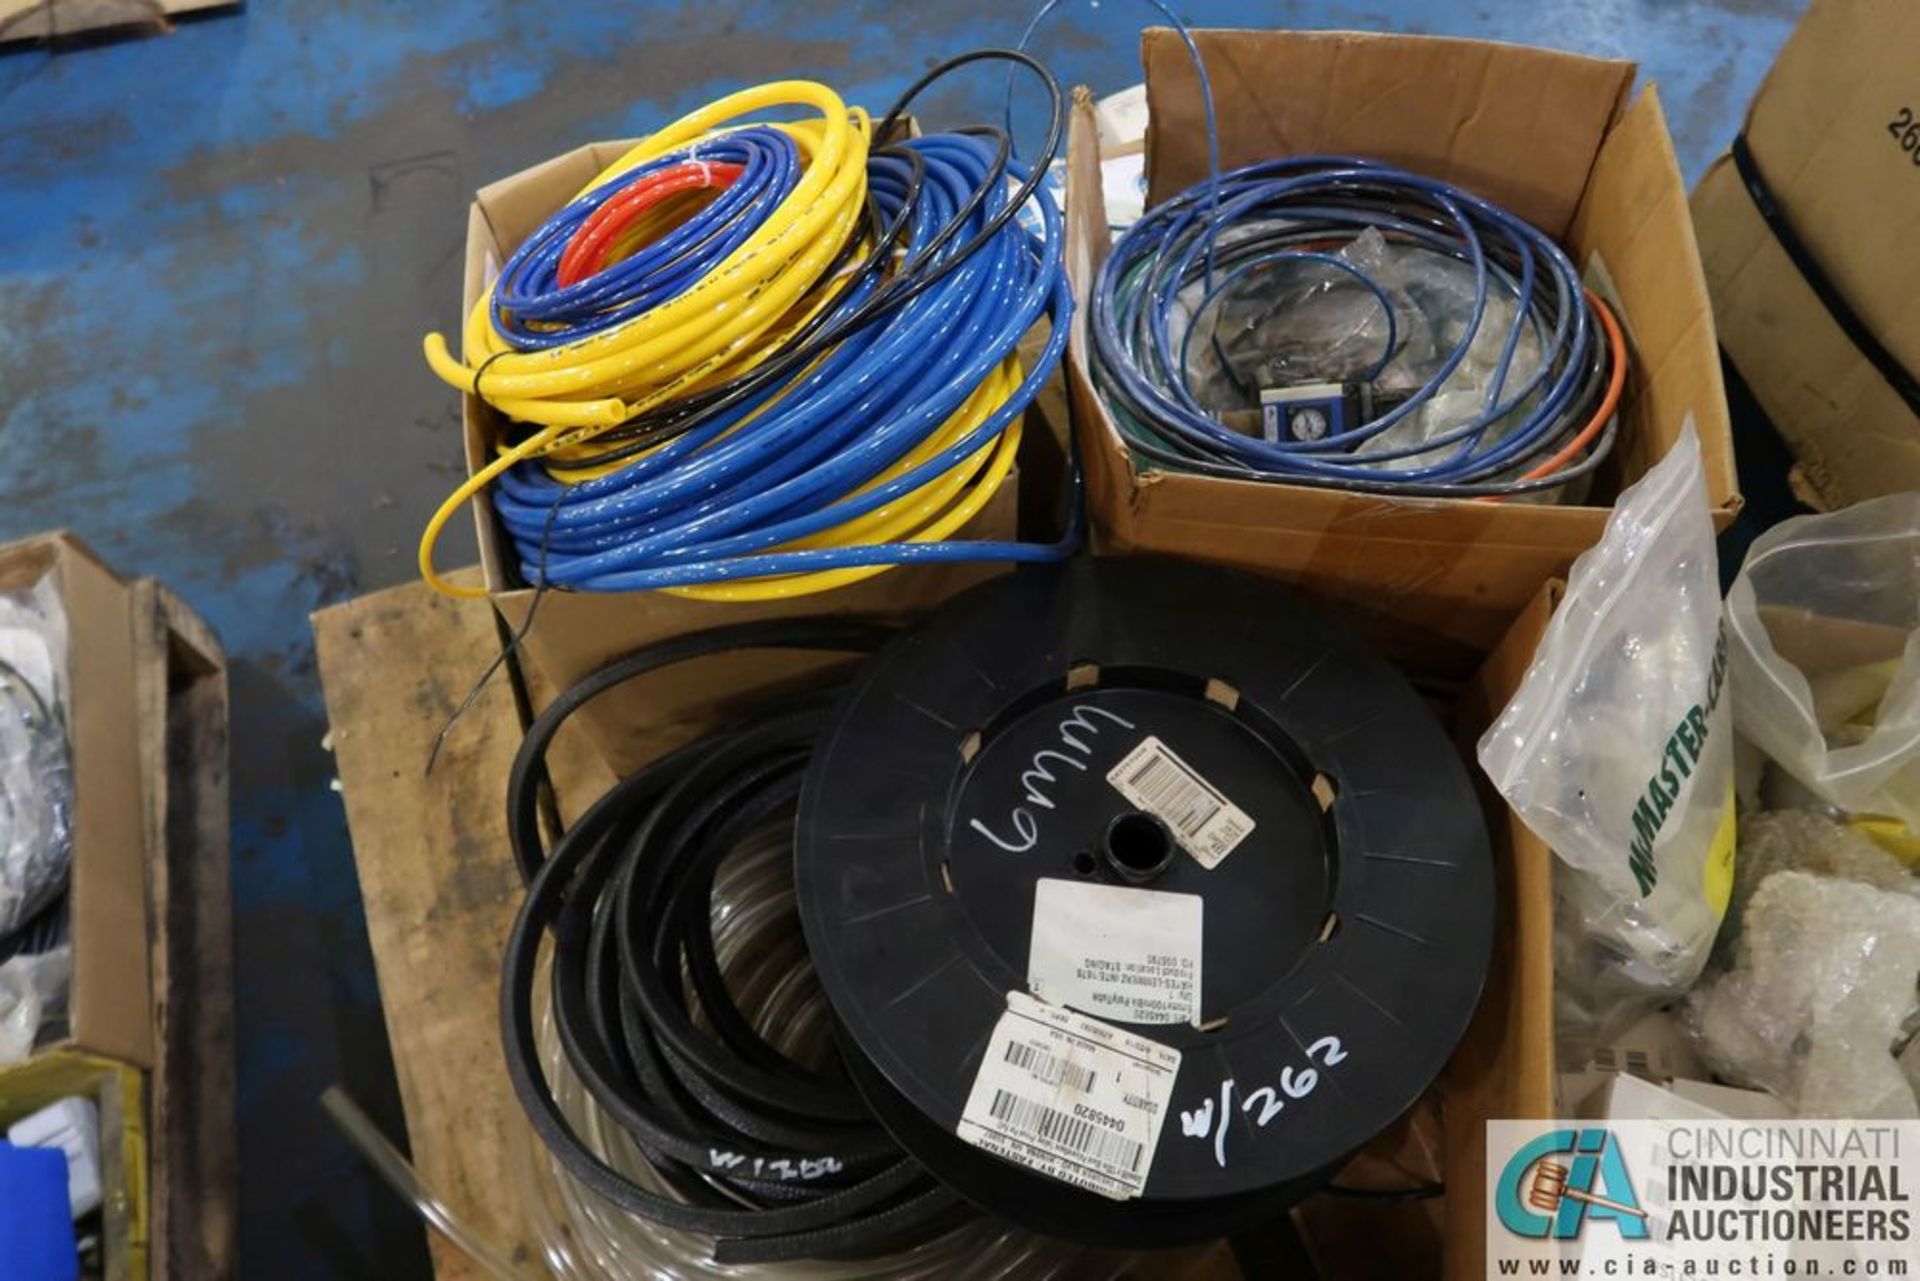 (LOT) (5) SKIDS ELECTRICAL BOXES, HARDWARE, PLUGS, SWITCHES, WIRE, HOSE, DRIVES - Image 11 of 16